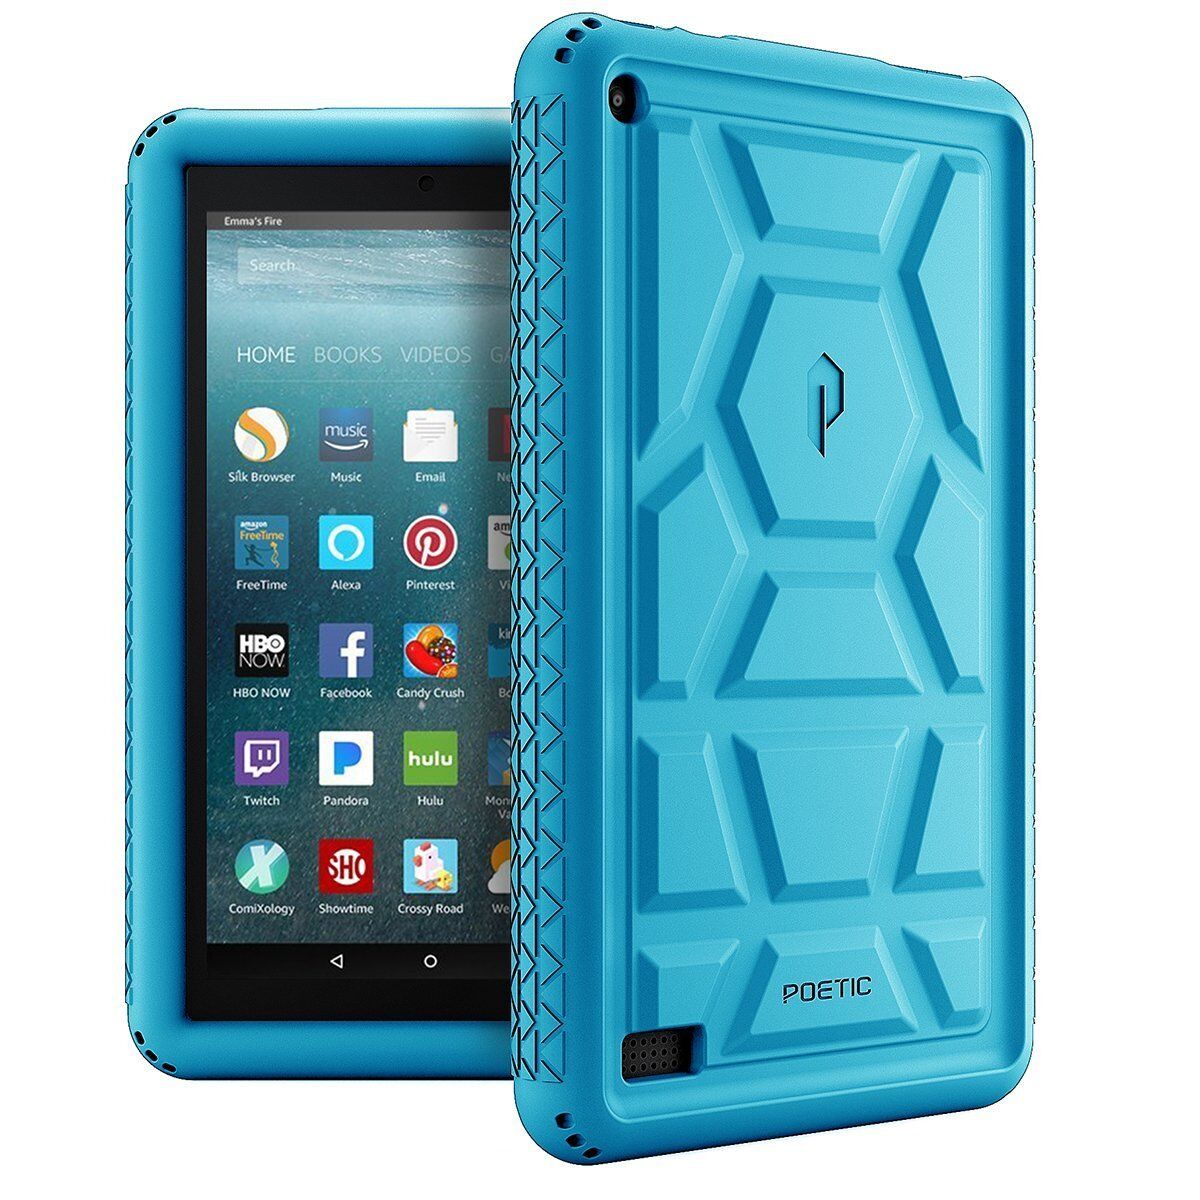 For Amazon Fire 7 (2017) Tablet Case Poetic Soft Silicone Protective Cover Blue